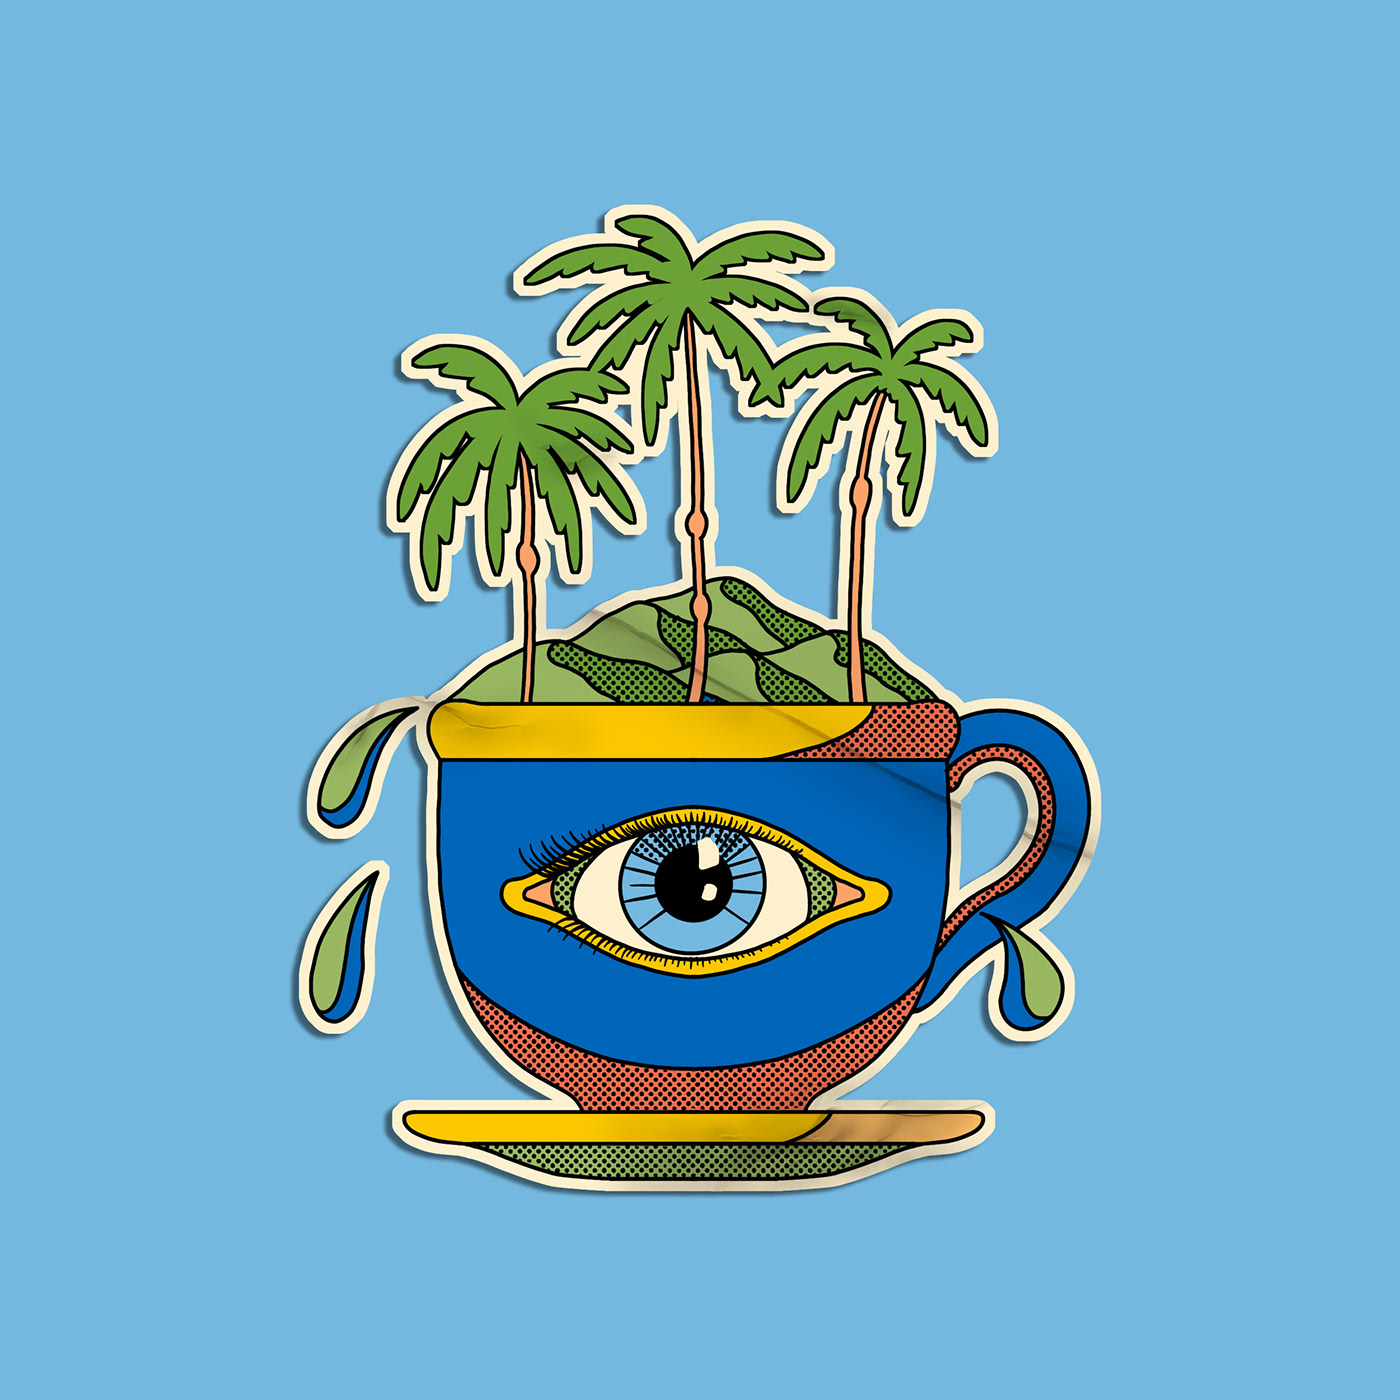 A cup with an eye, mountains and palm trees depicting the region of Salento, Colombia in the form of